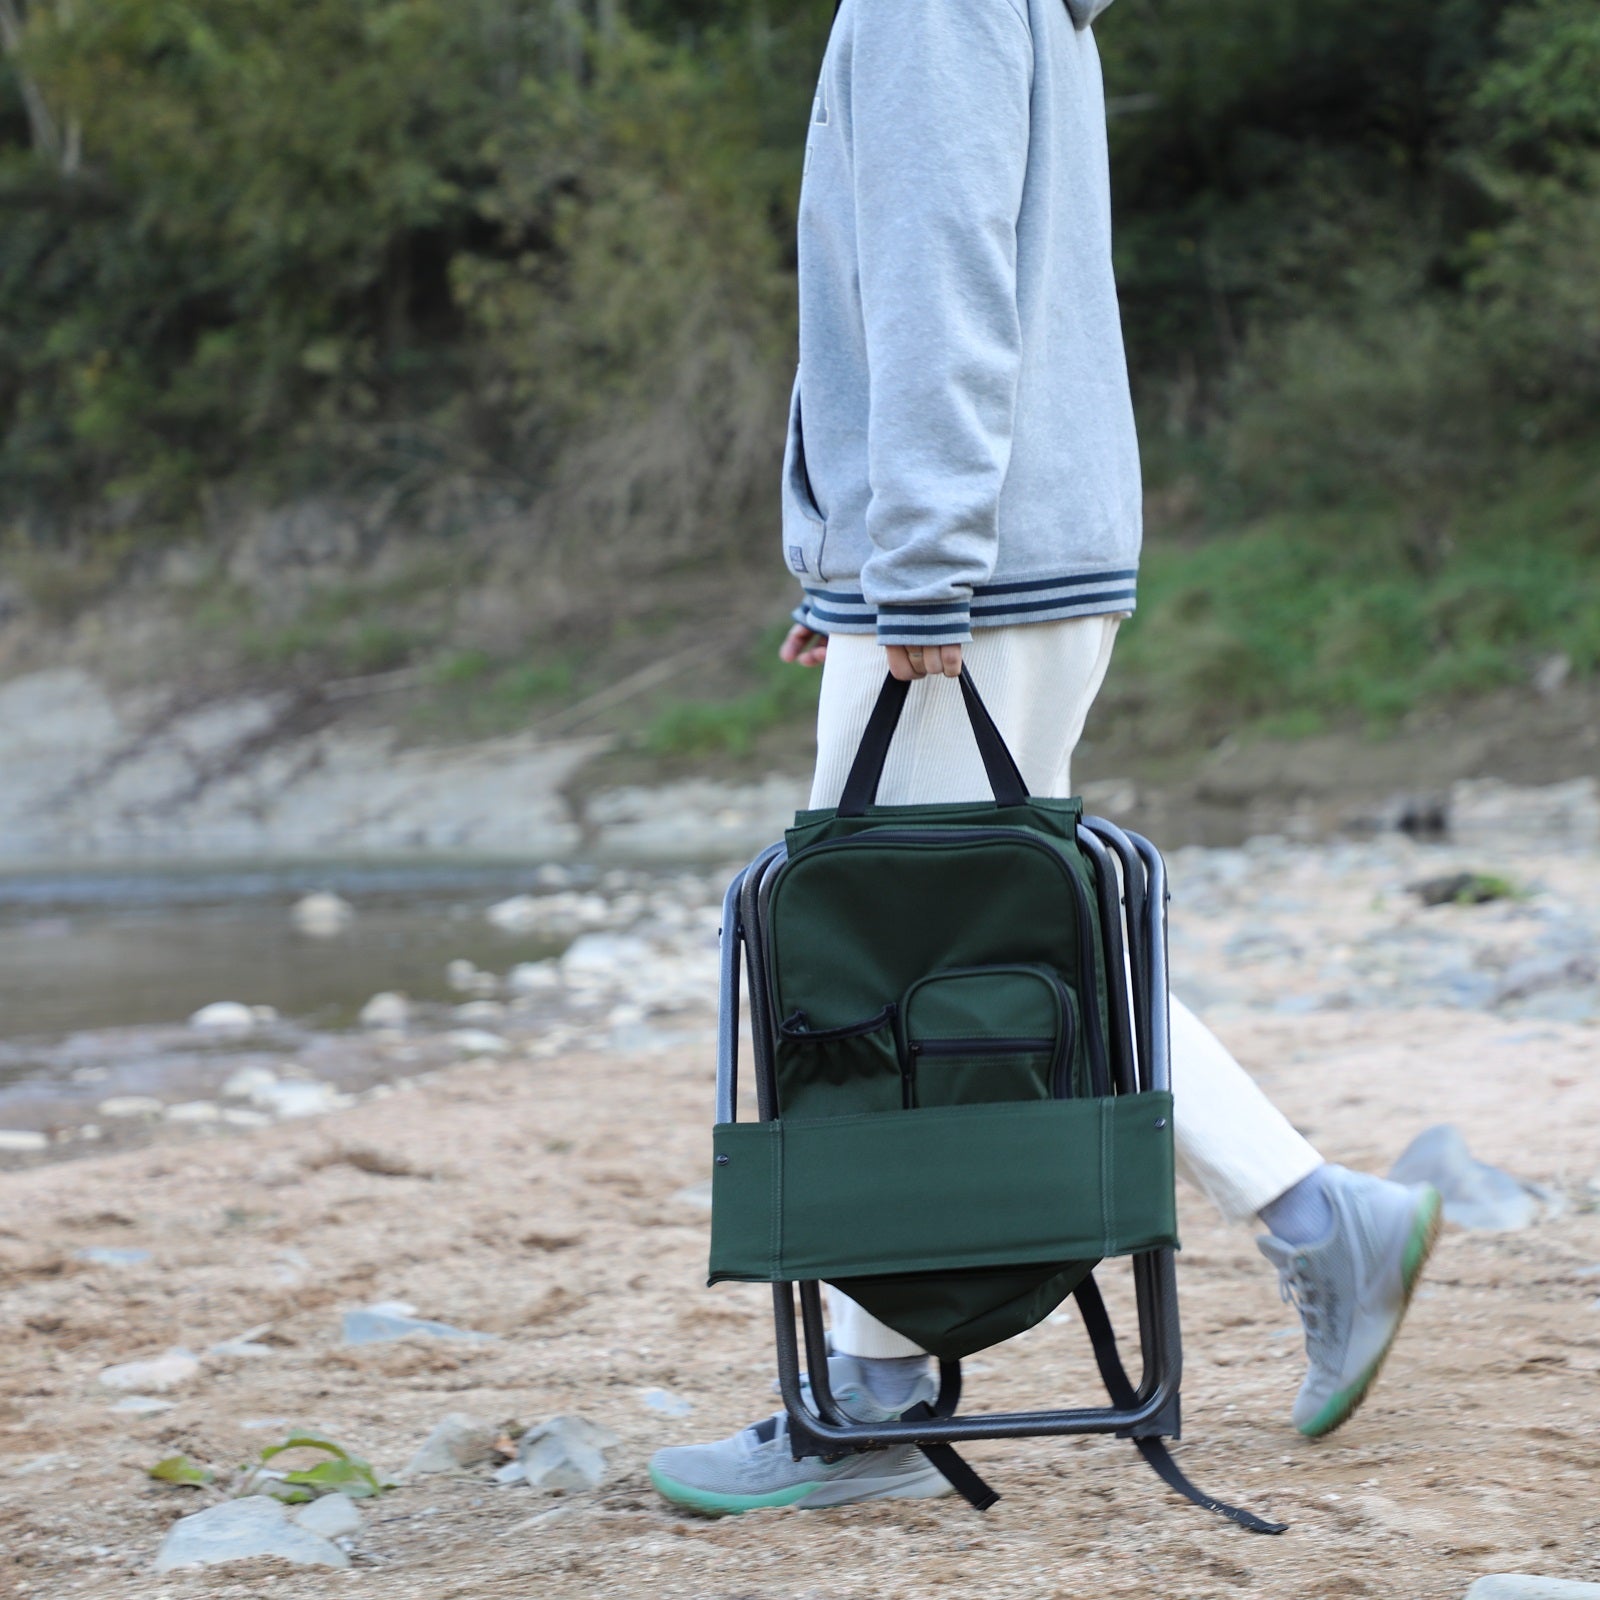 Portal Outdoors Backpack Cooler Stool